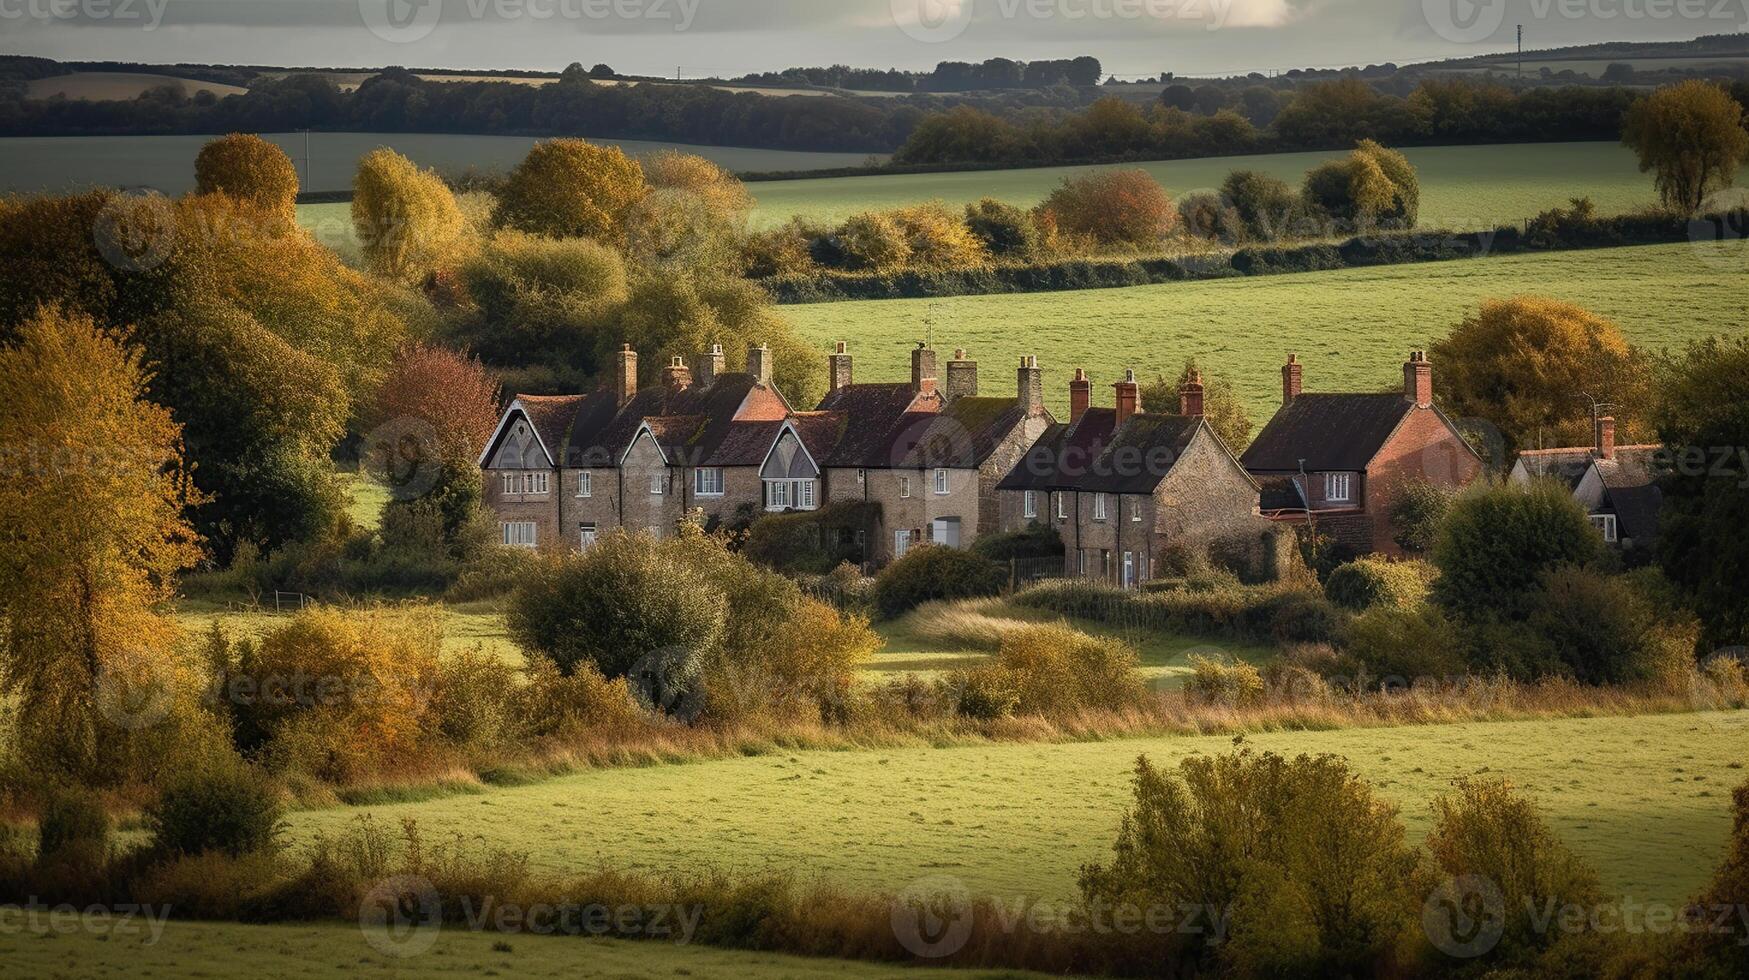 A typical view of rural housing surrounded by countryside in early autumn, photo